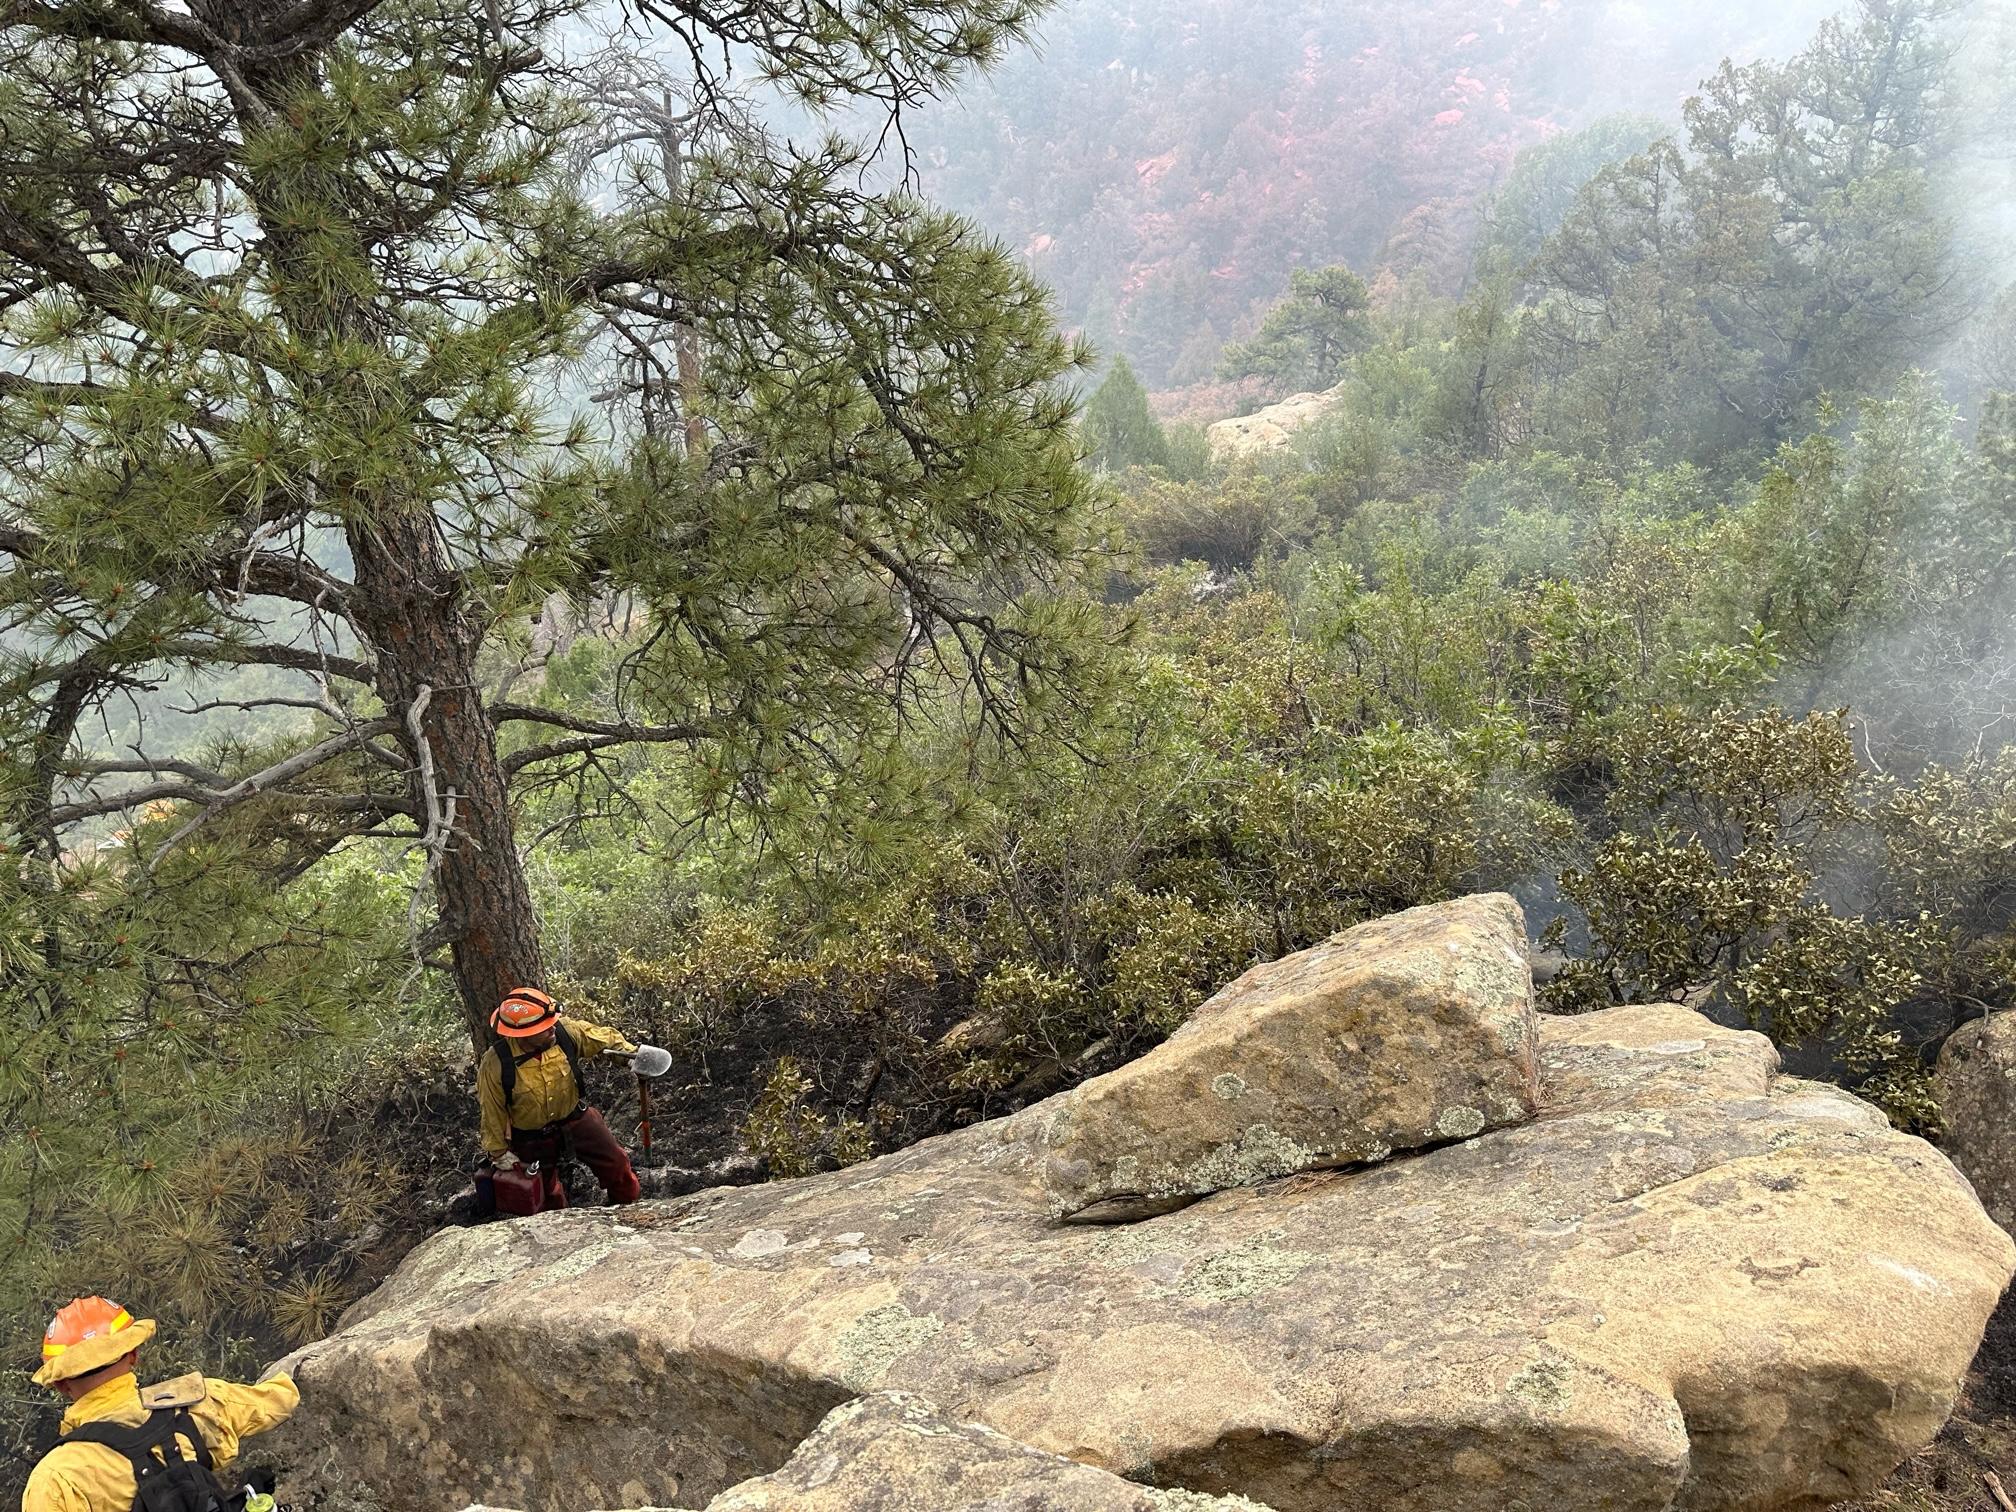 Two fire fighters are hiking around a large boulder along the fire line.